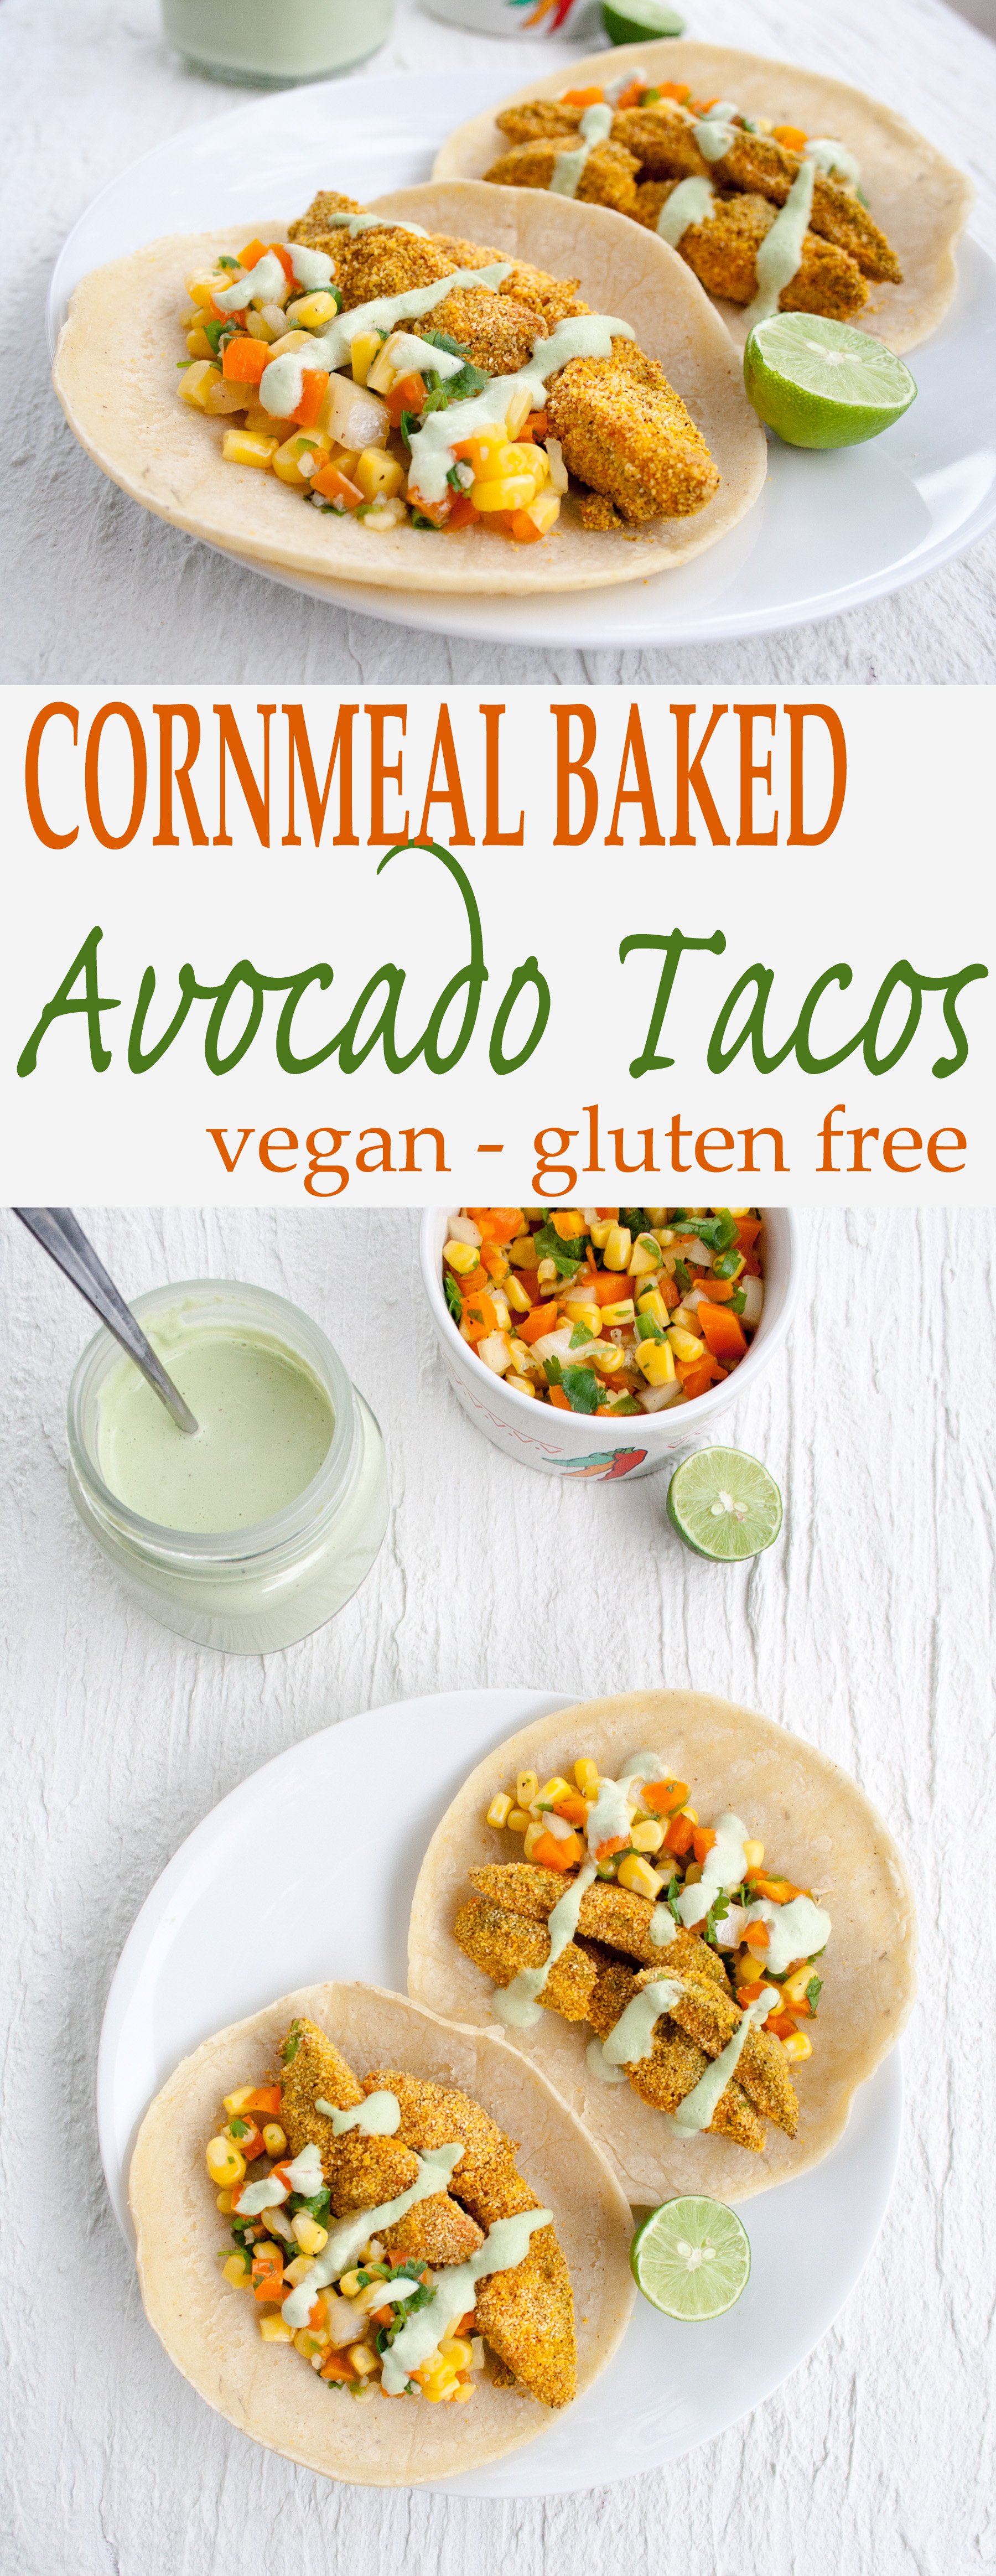 Cornmeal Baked Avocado Tacos collage photo with text.